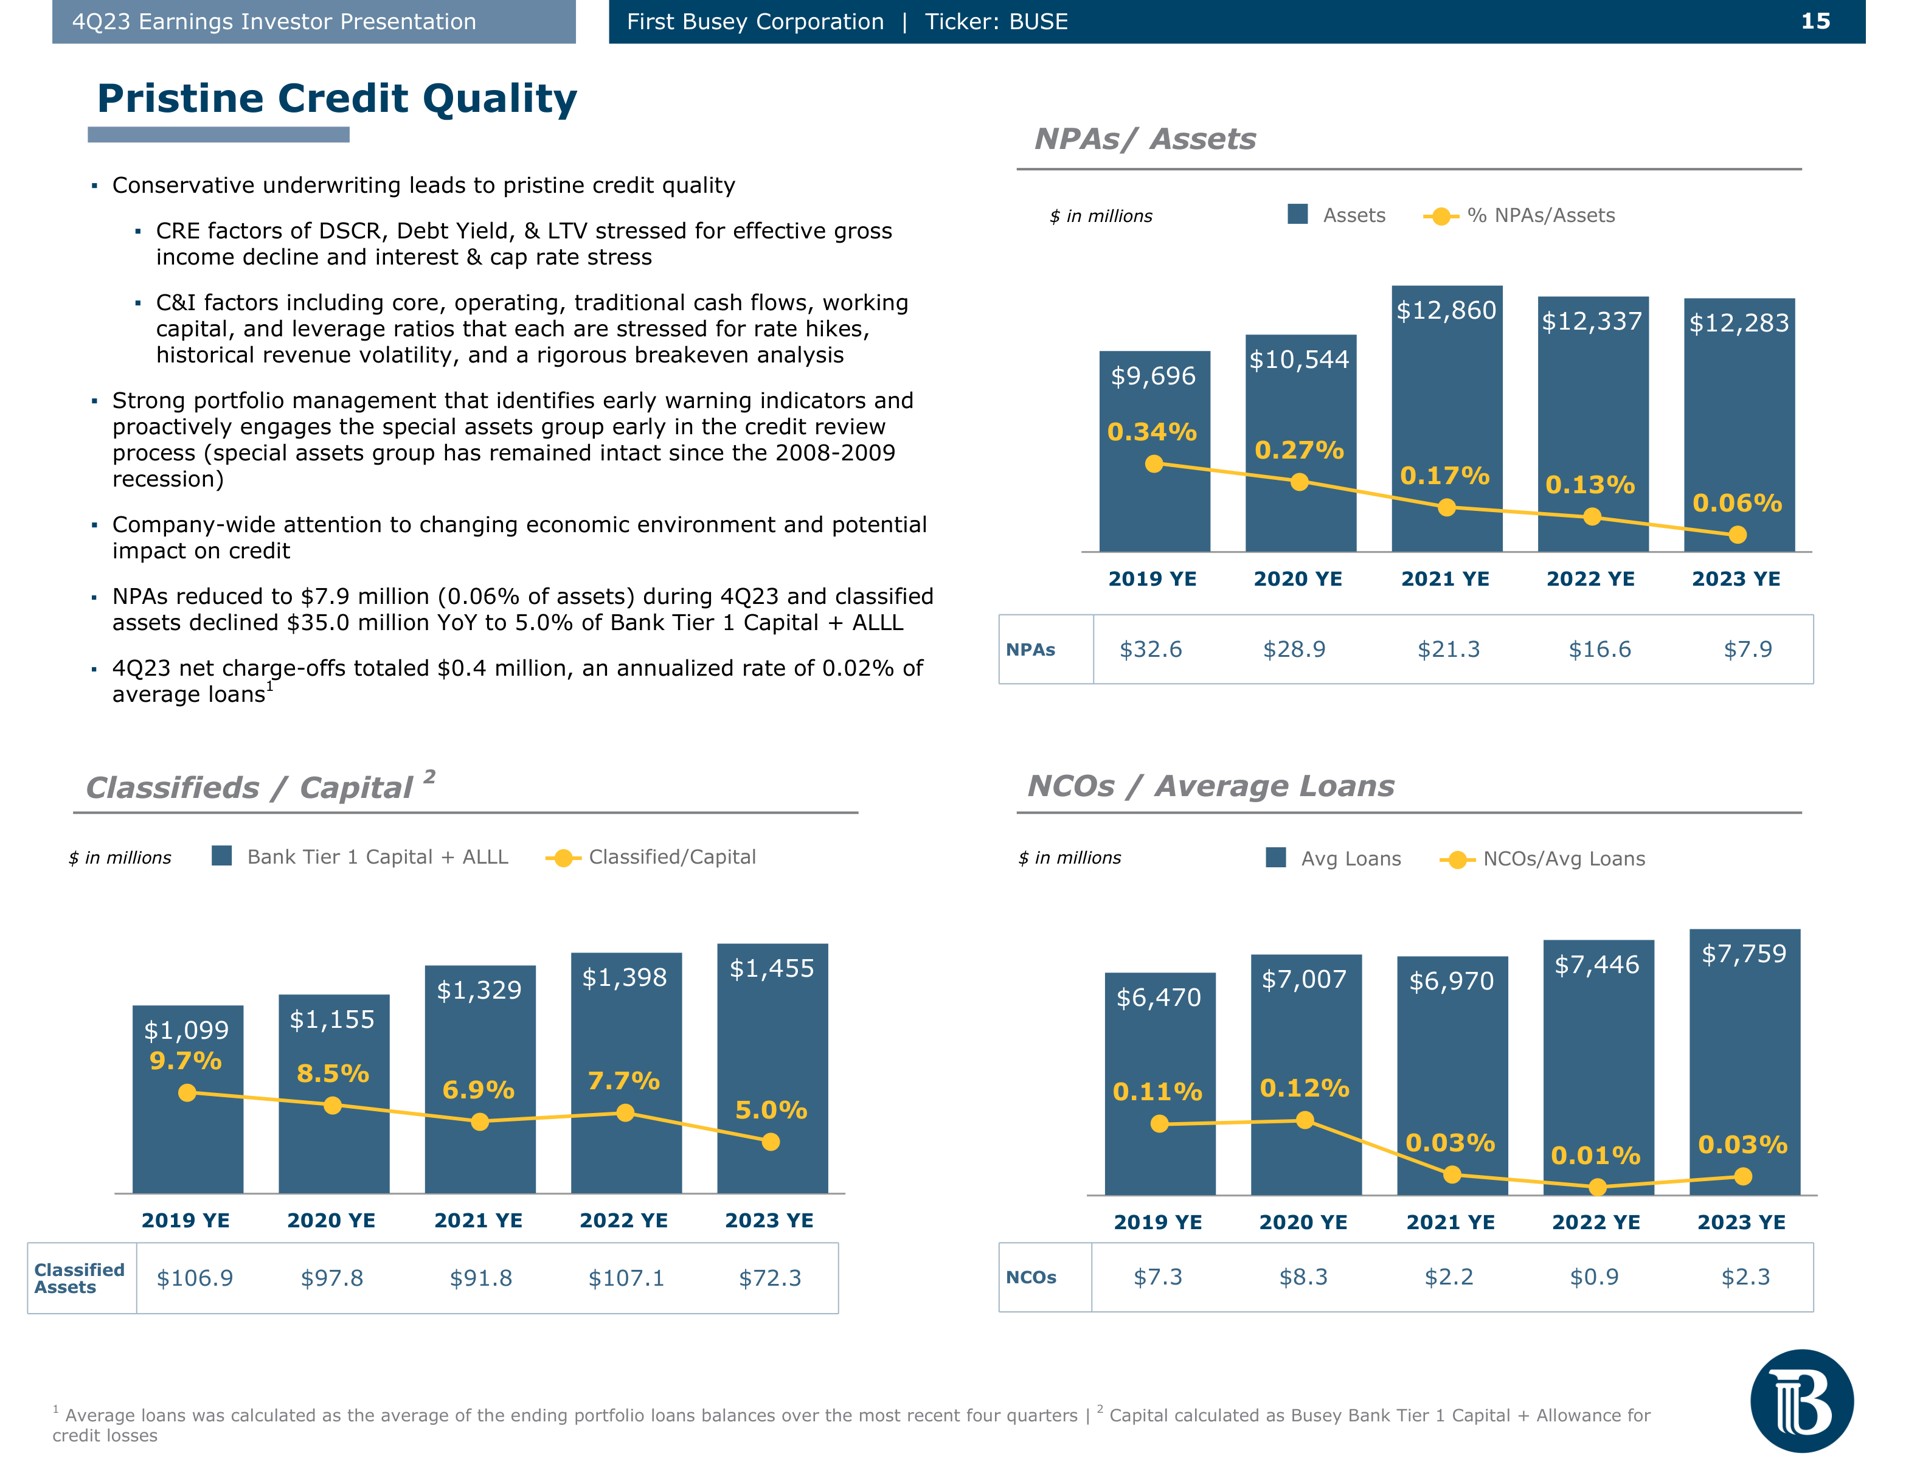 pristine credit quality assets classifieds capital average loans | First Busey